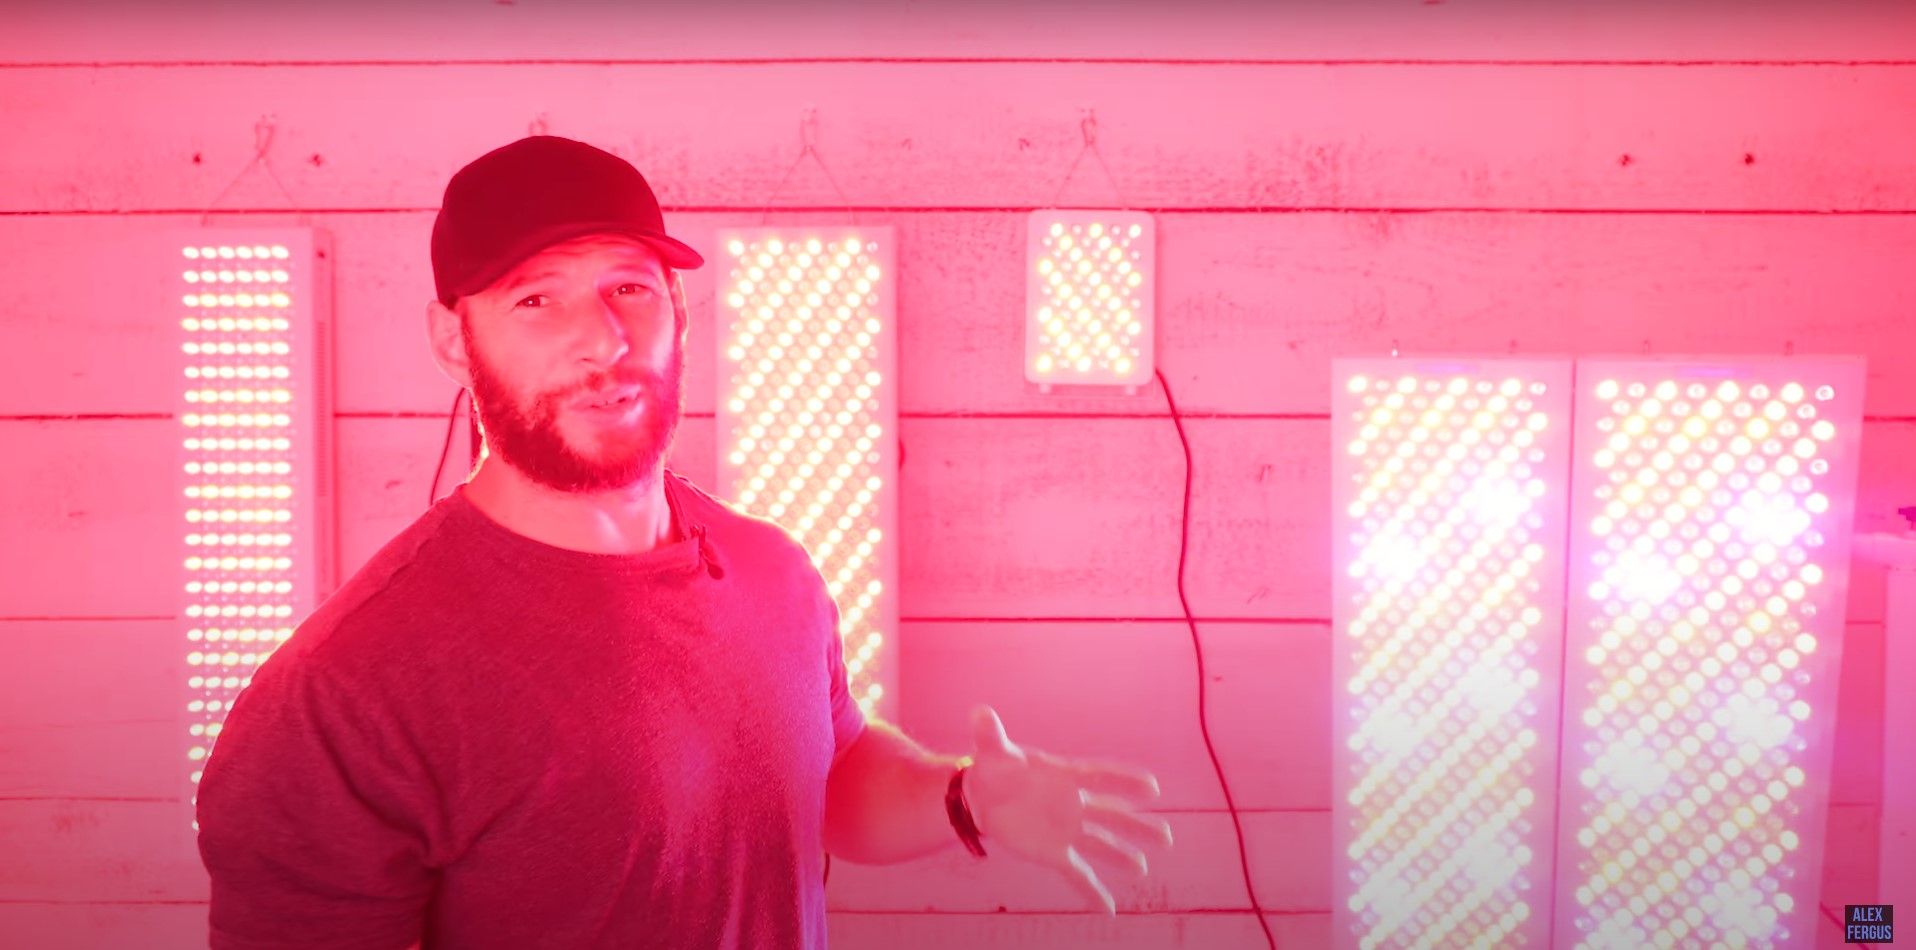 Alex Fergus standing in front of a variety of red light therapy panels